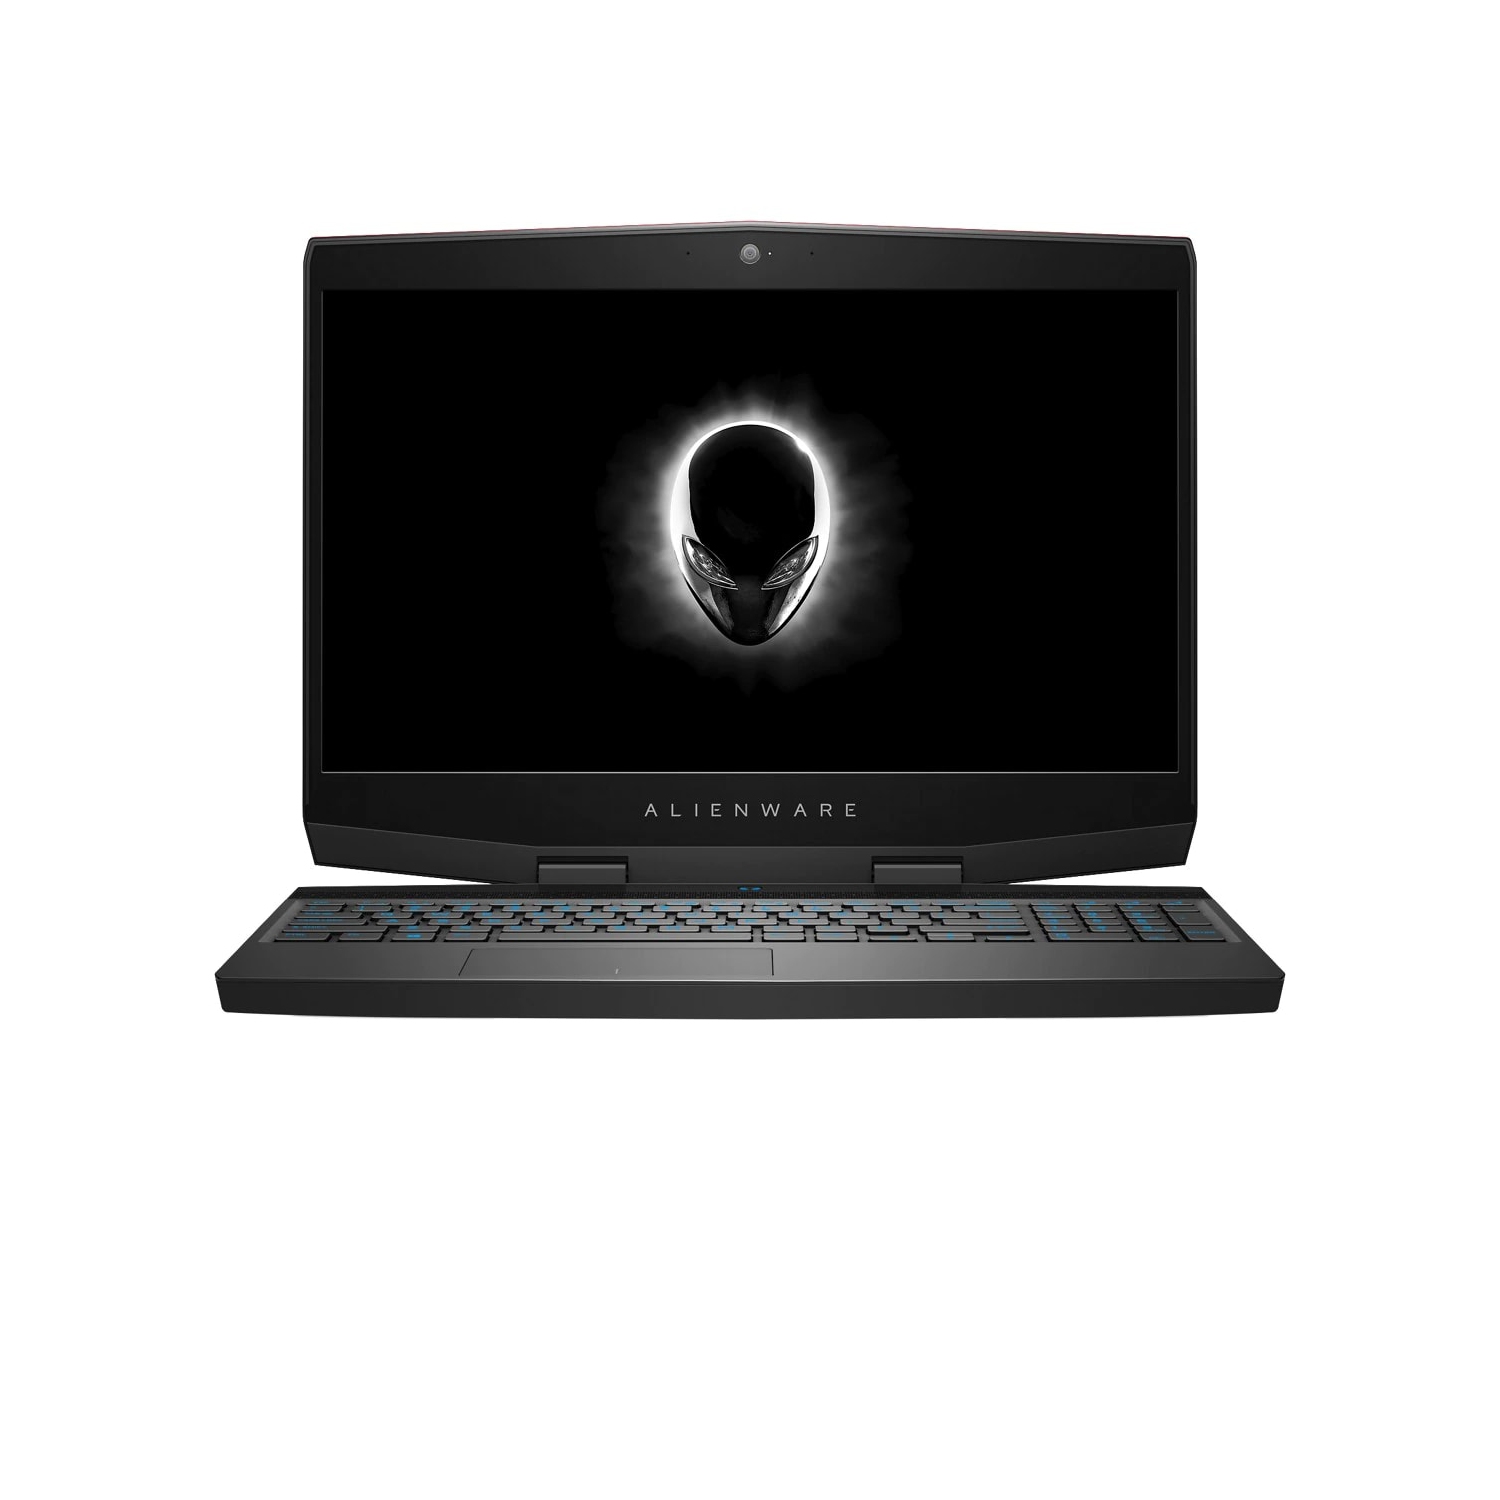 Refurbished (Excellent) - Dell Alienware m15 Gaming Laptop (2018) | 15.6" FHD | Core i7 - 1TB SSD - 32GB RAM - RTX 2070 | 6 Cores @ 4.5 GHz Certified Refurbished